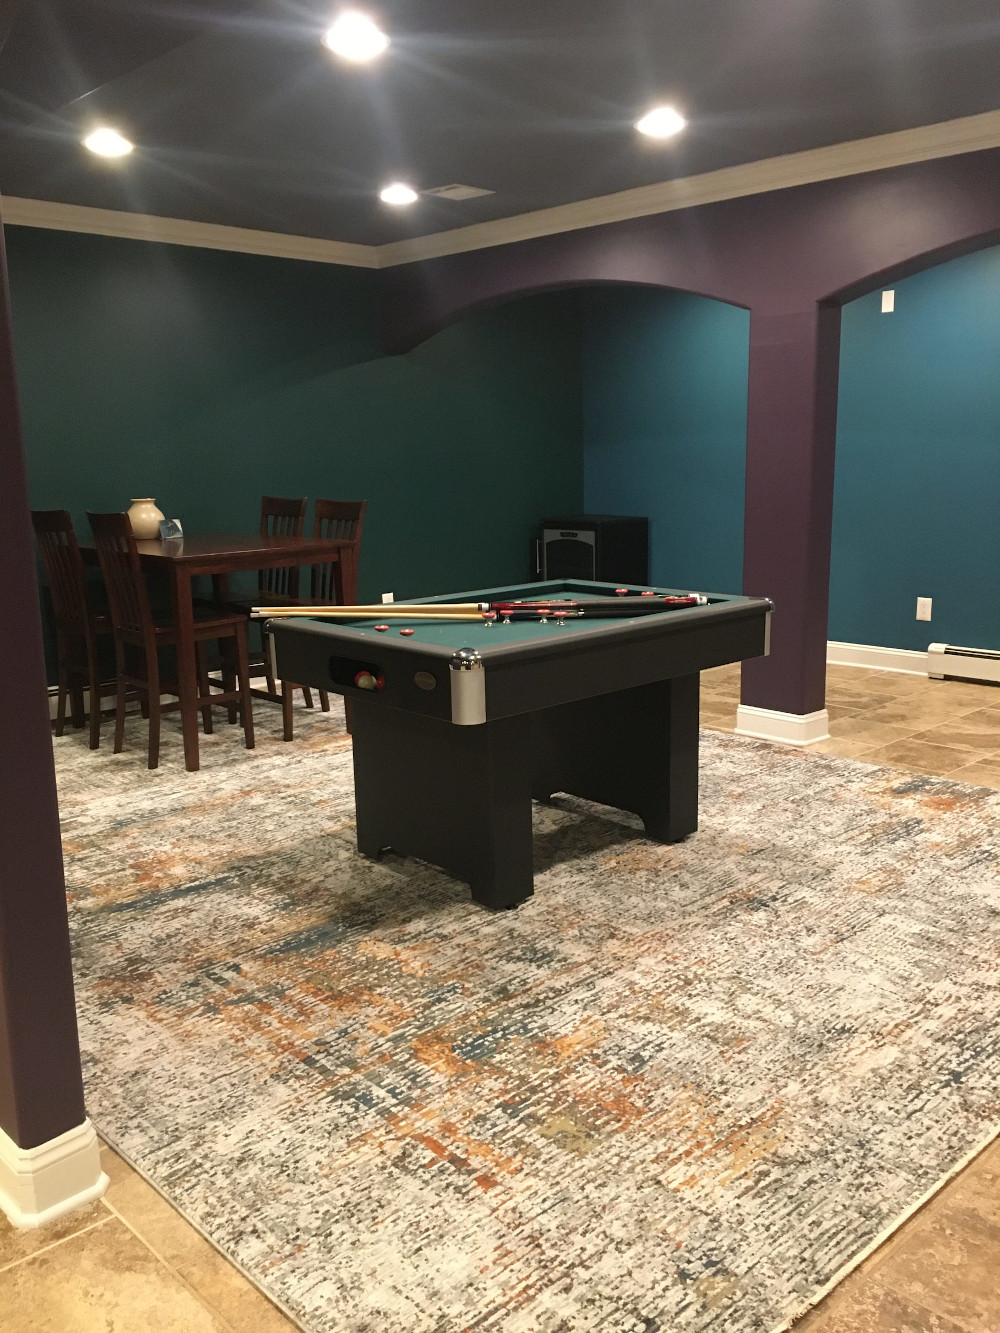 Finished Basement: 3 Fun Ways to Use Your Home’s Space